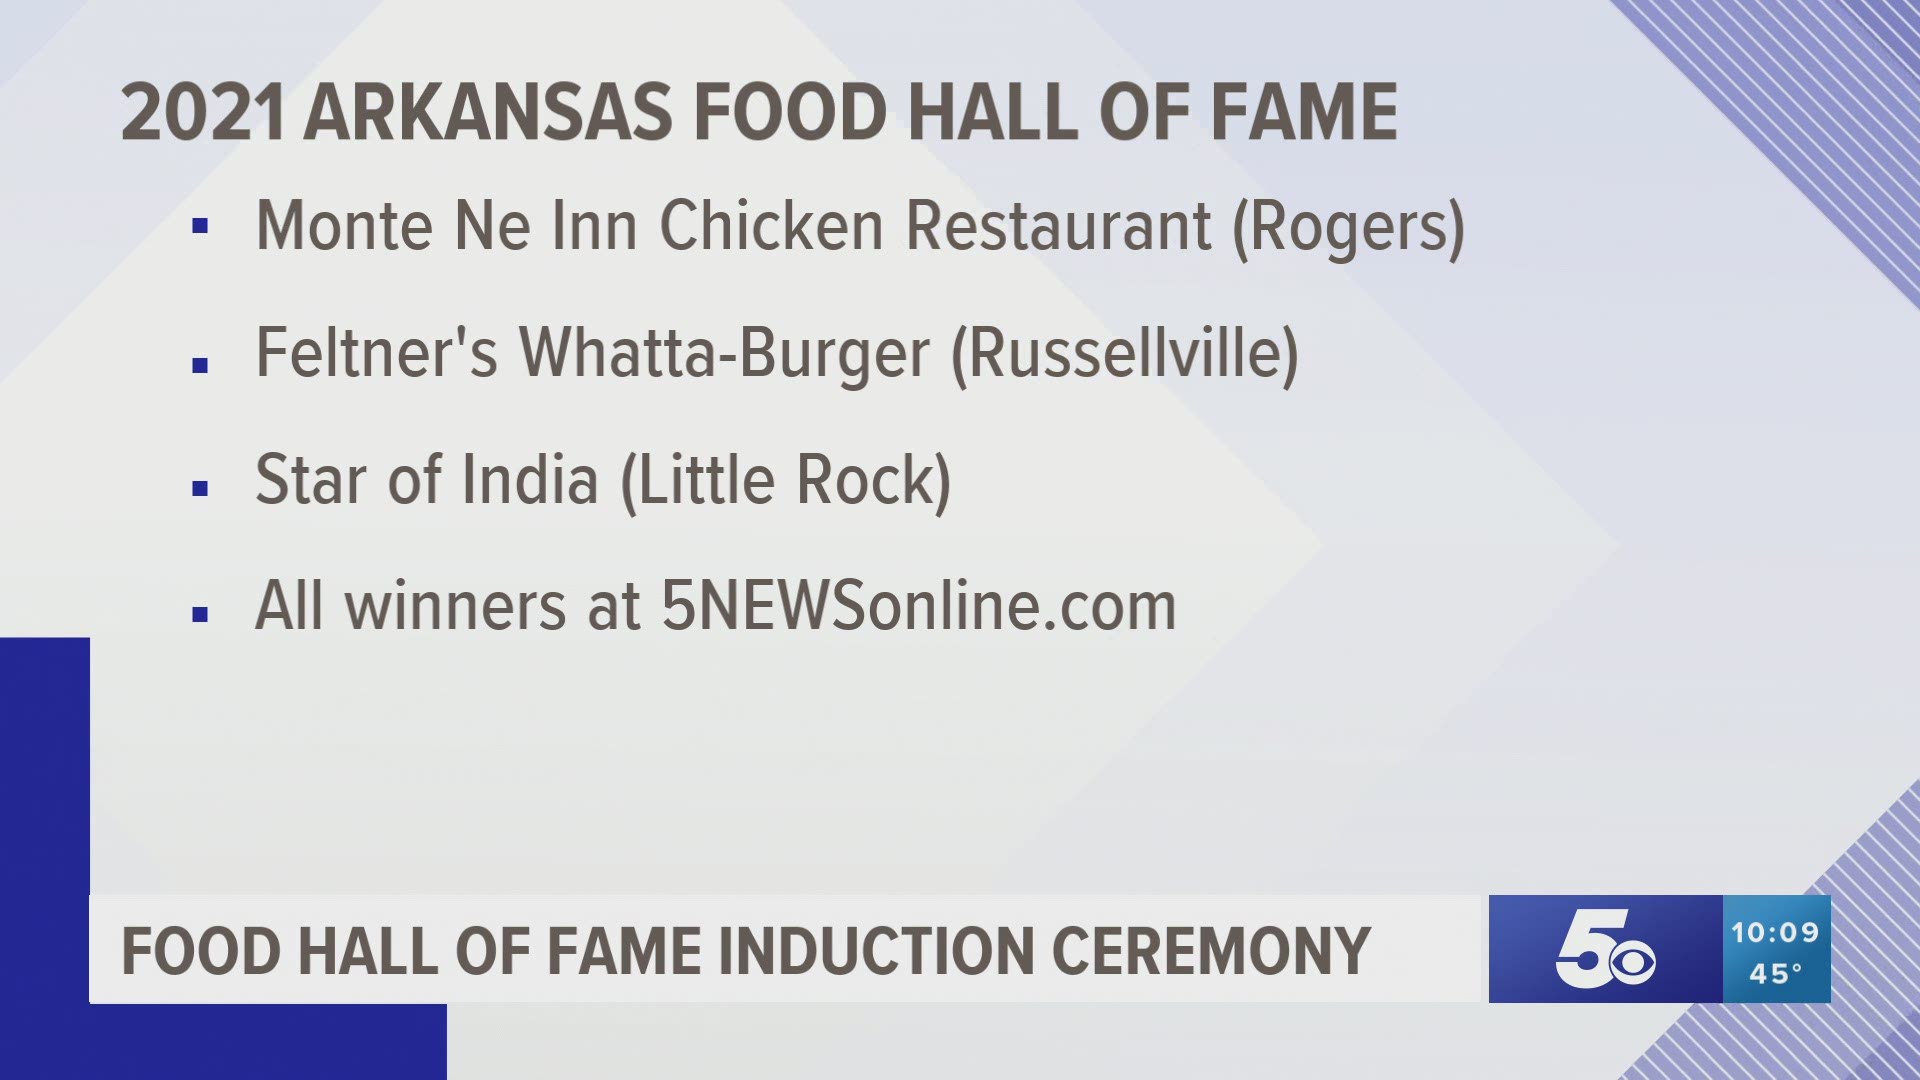 Local restaurants recognized in 2021 Arkansas Food Hall of Fame